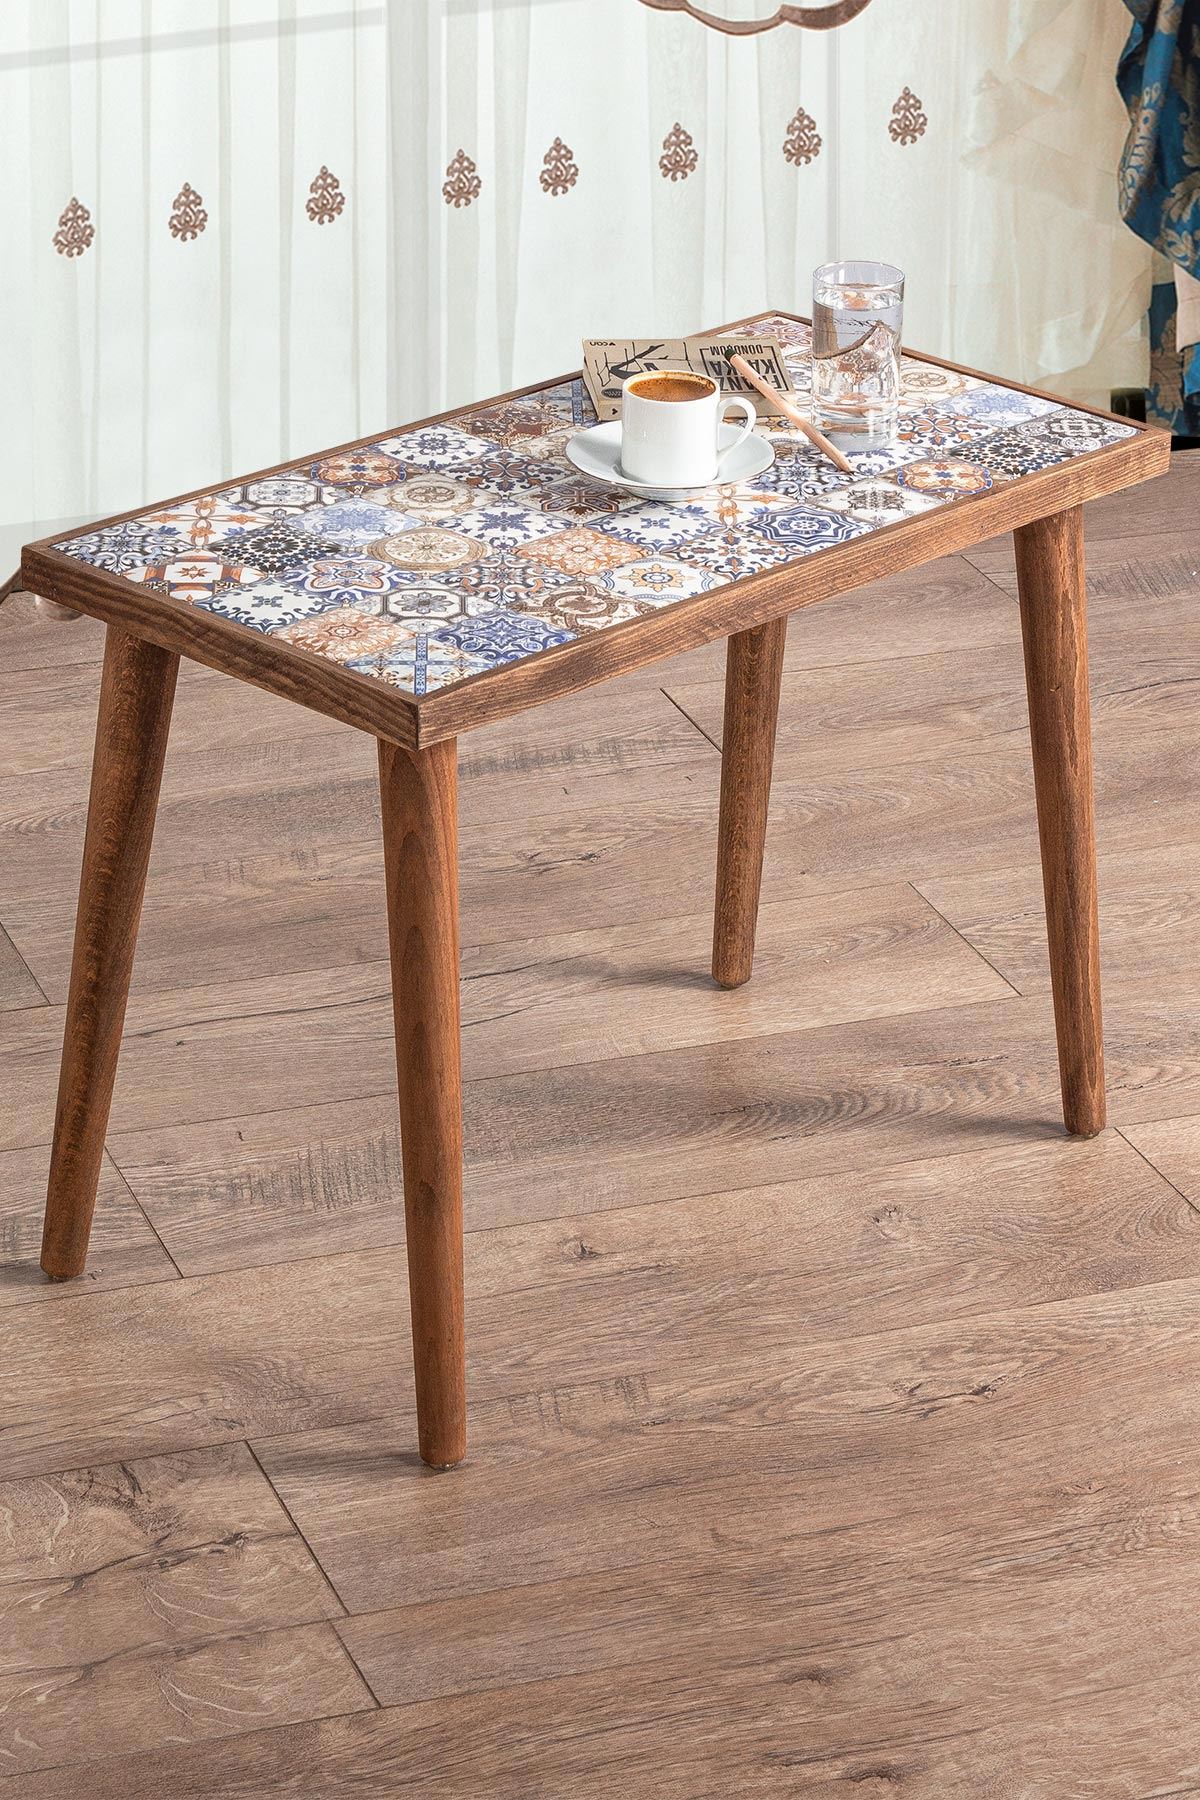 Bofigo Wooden Tile Center Table Wooden Solid Wood Coffee Table 62x32 Cm Walnut